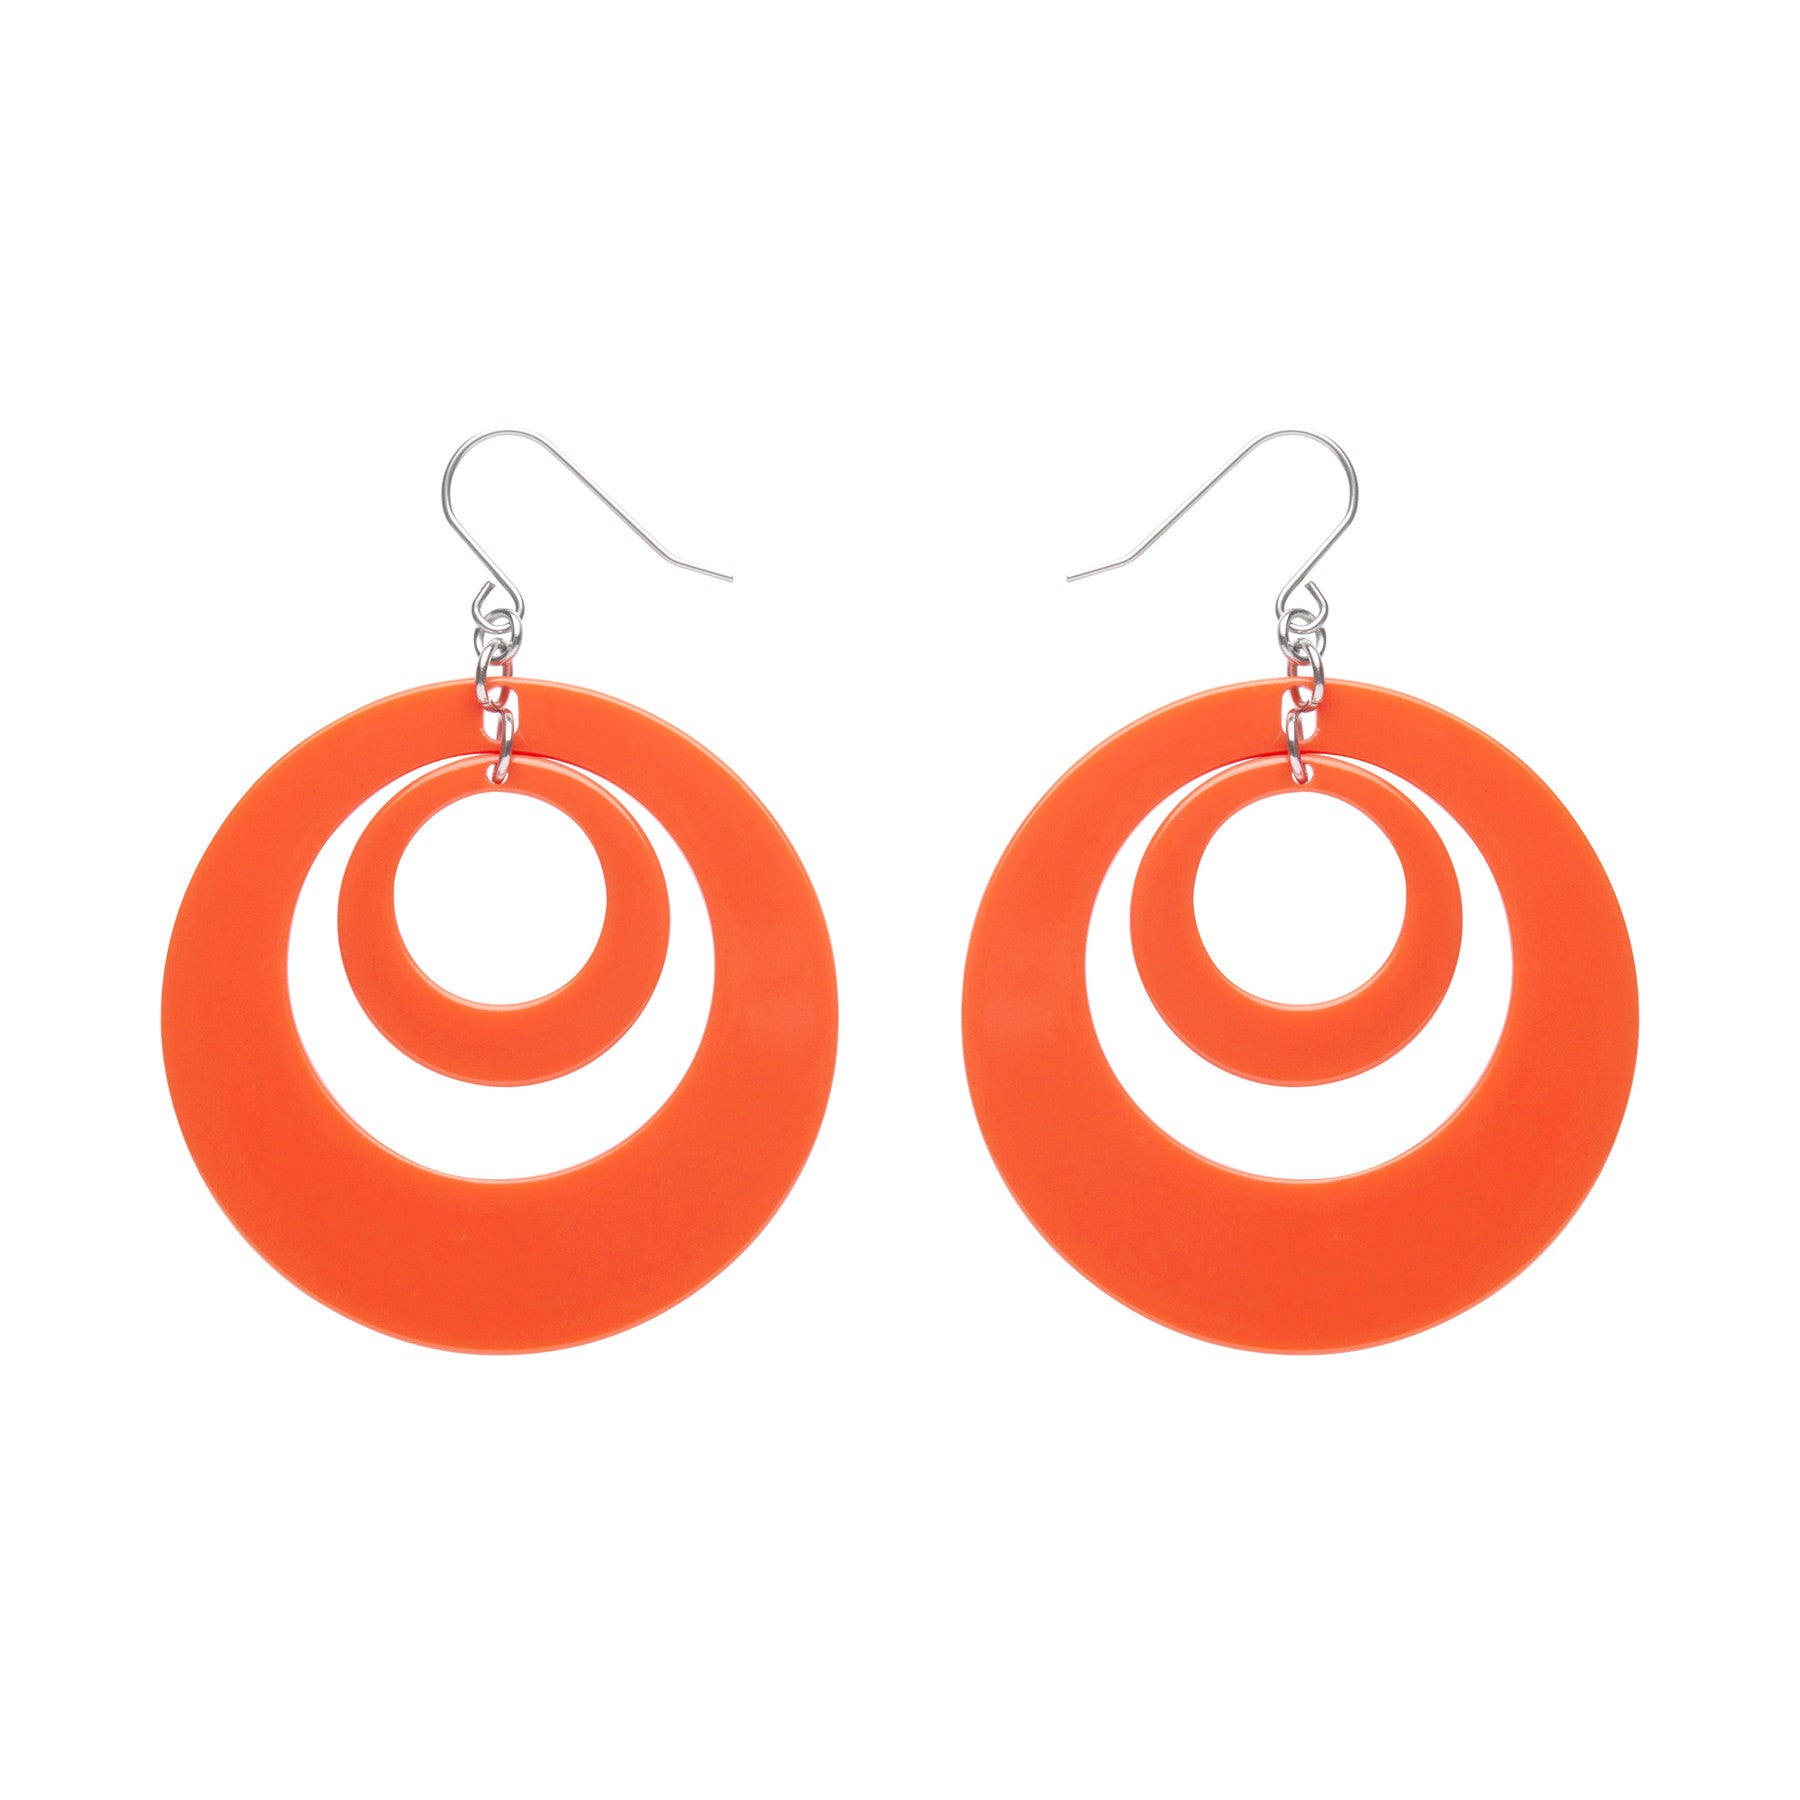 Mission to the Moon Collection double drop hoop dangle earrings in orange 100% Acrylic resin